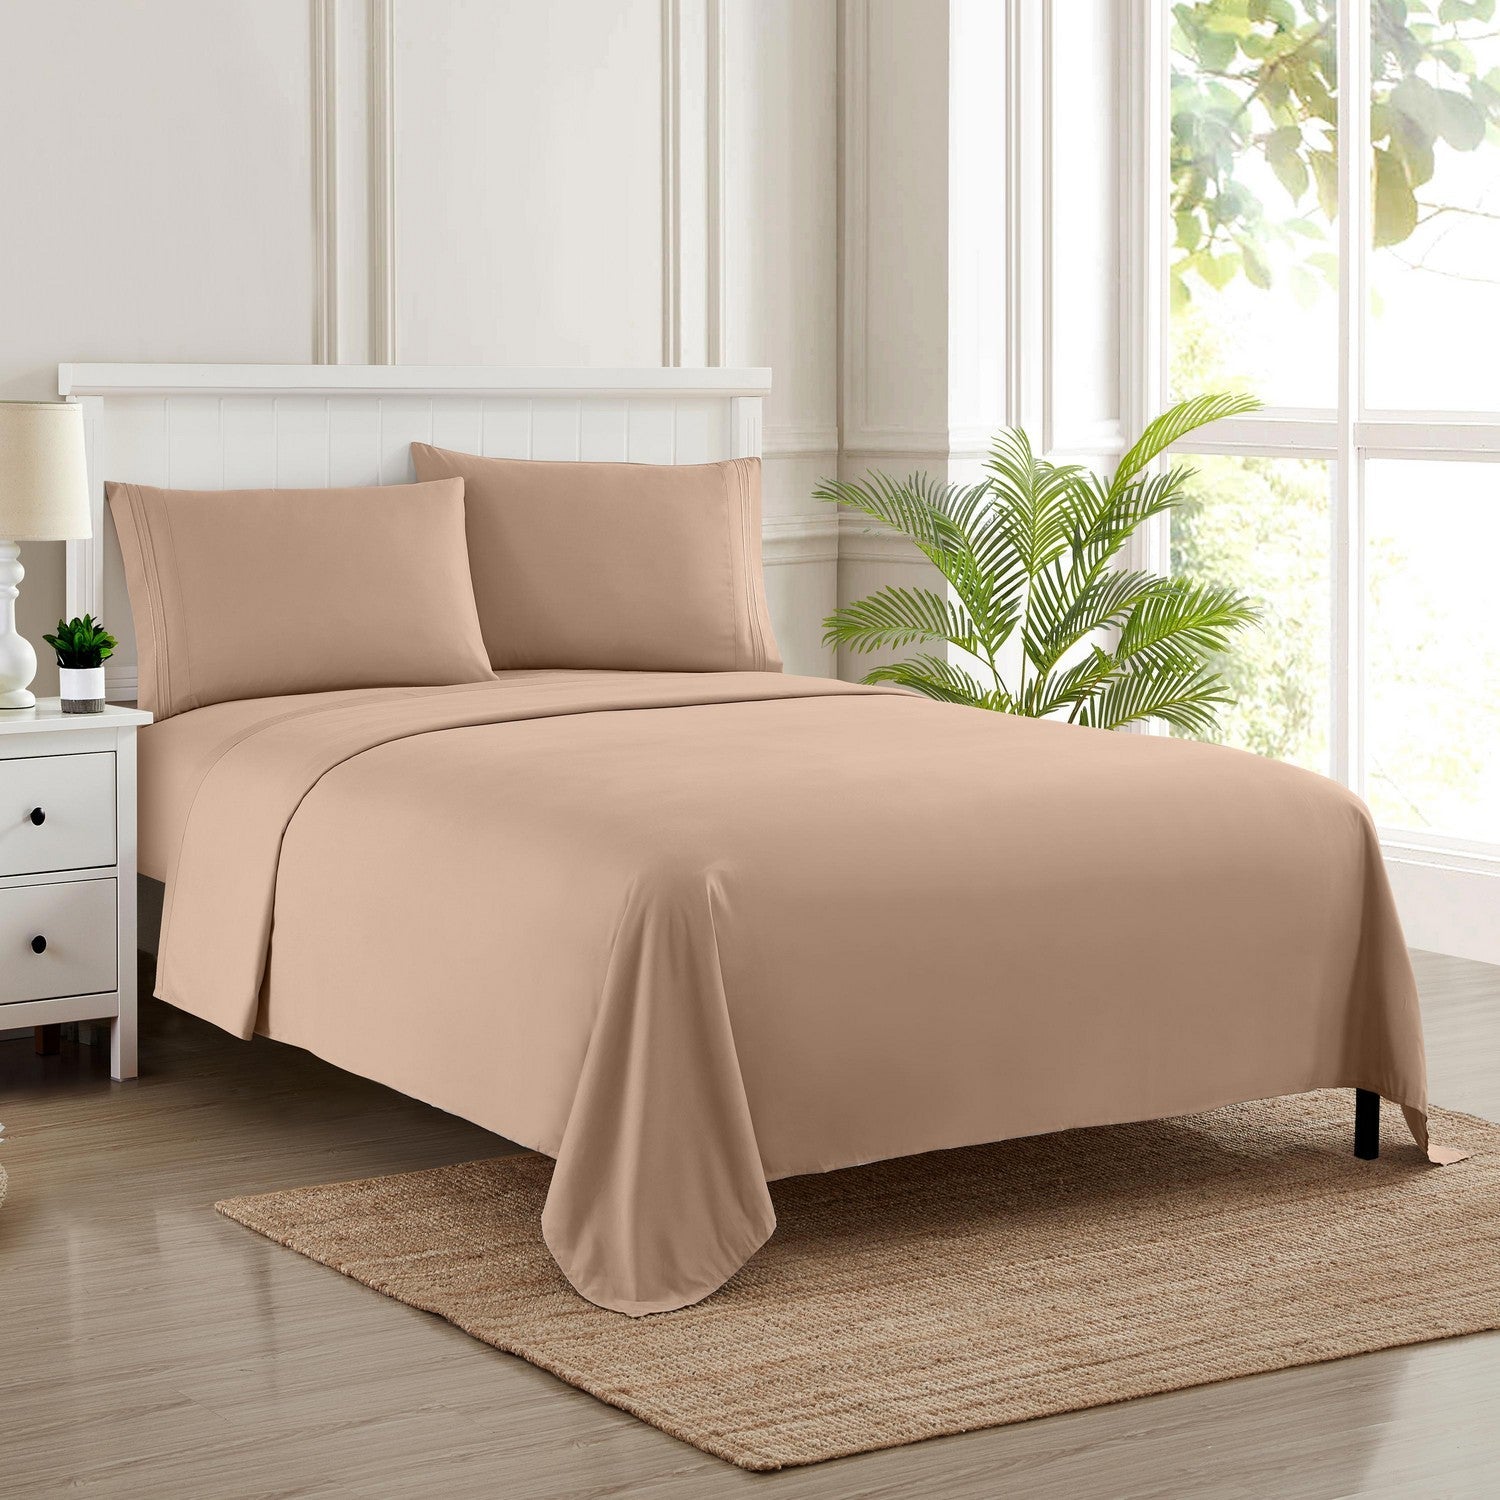 Classic 4-Piece Bed Sheet Set (Taupe) - Bed